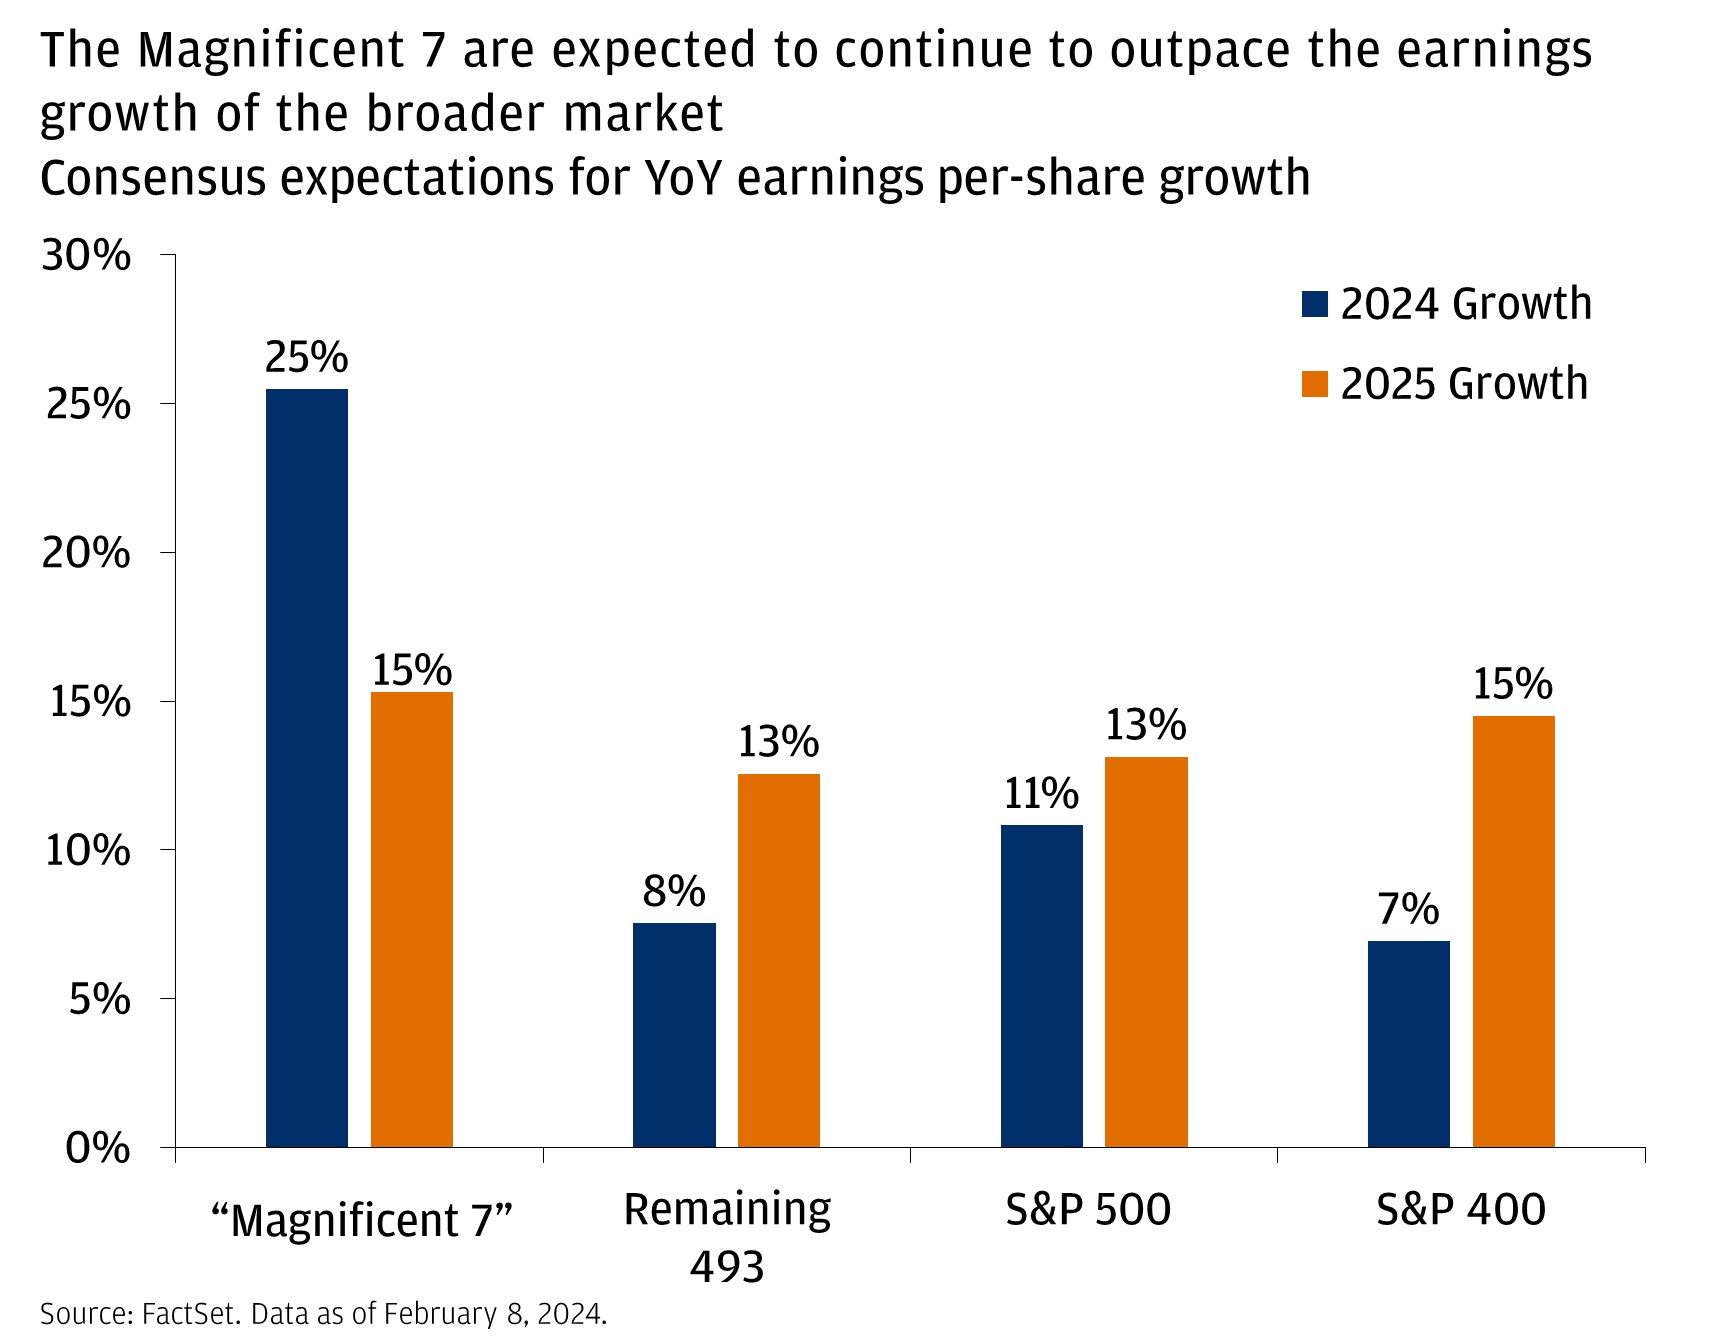 This chart shows YoY earnings per-share growth for the Mag-7, remaining 493, S&P 500, and S&P 400., for 2024 and 2025.